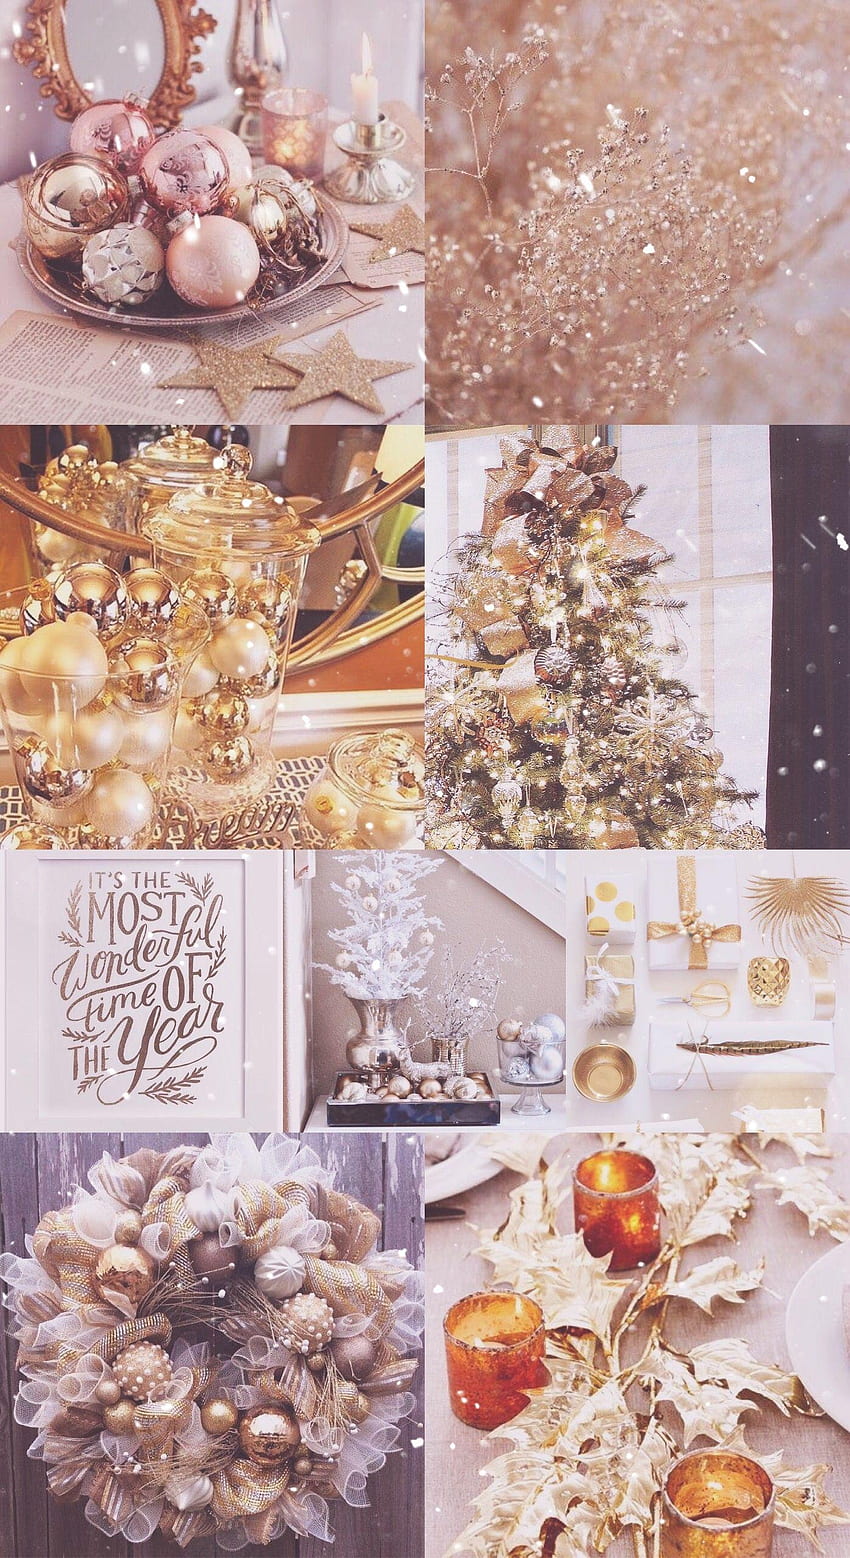 10 Christmas Wallpaper Collages  White Christmas Collage  Idea Wallpapers   iPhone WallpapersColor Schemes